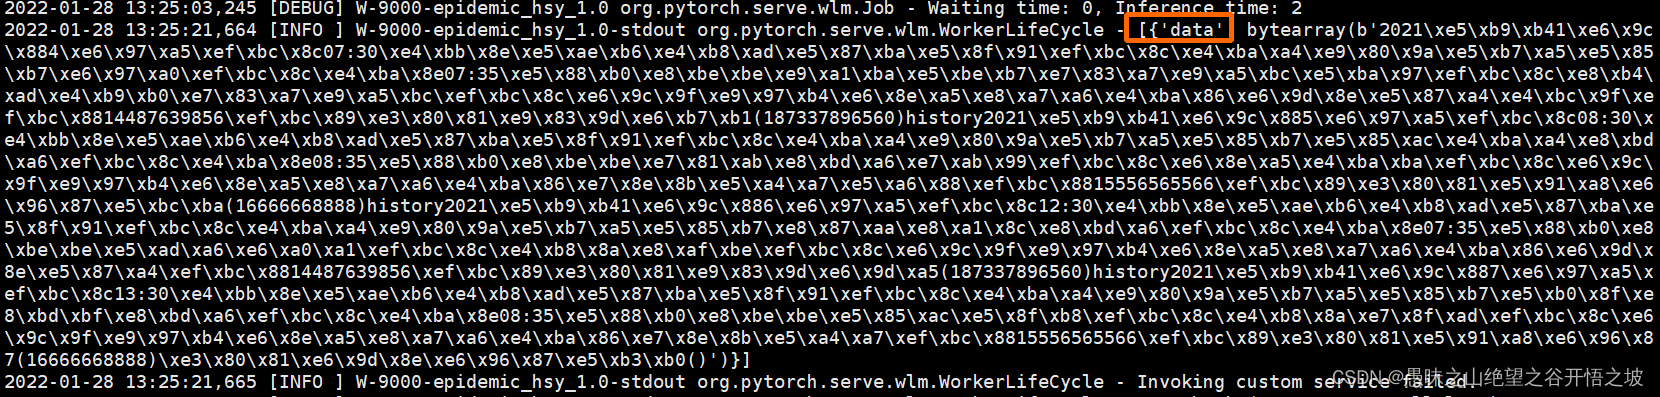 Torchserve 接口调用报错Typeerror: Expected String Or Bytes-Like Object_Expected  String Or Bytes-Like Object Torch_愚昧之山绝望之谷开悟之坡的博客-Csdn博客